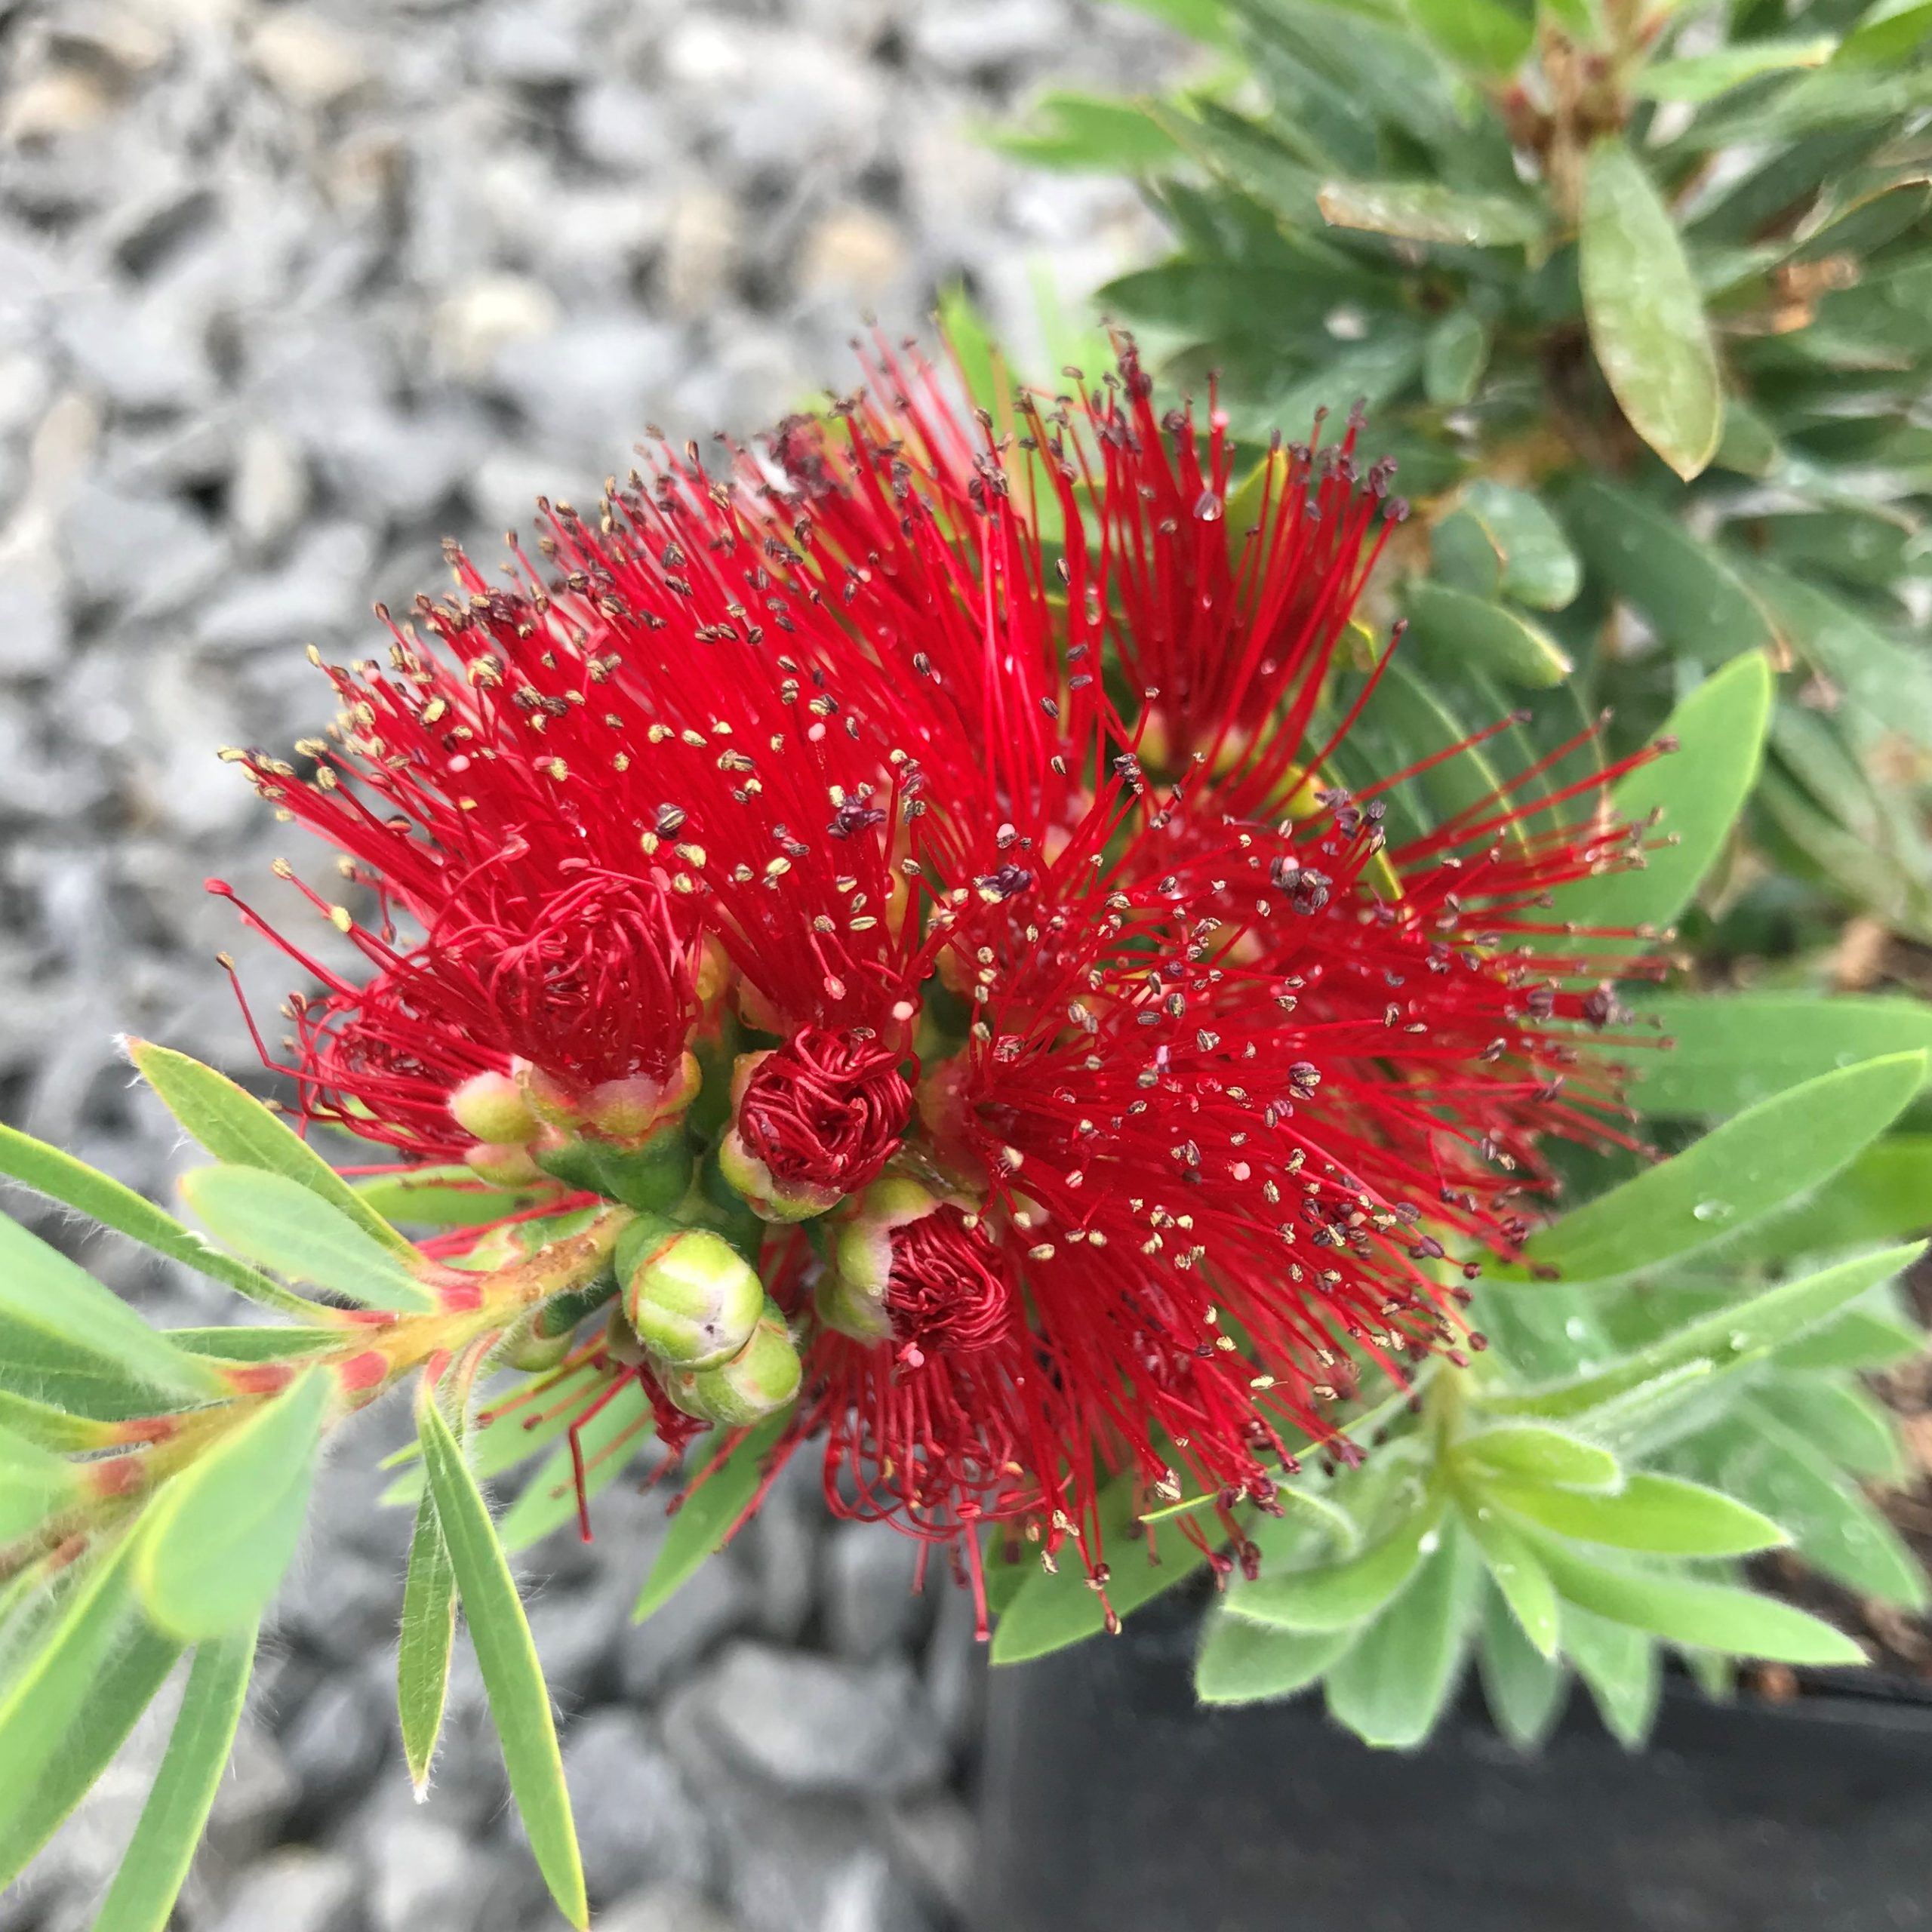 Bottle brush plant care and problems Idea